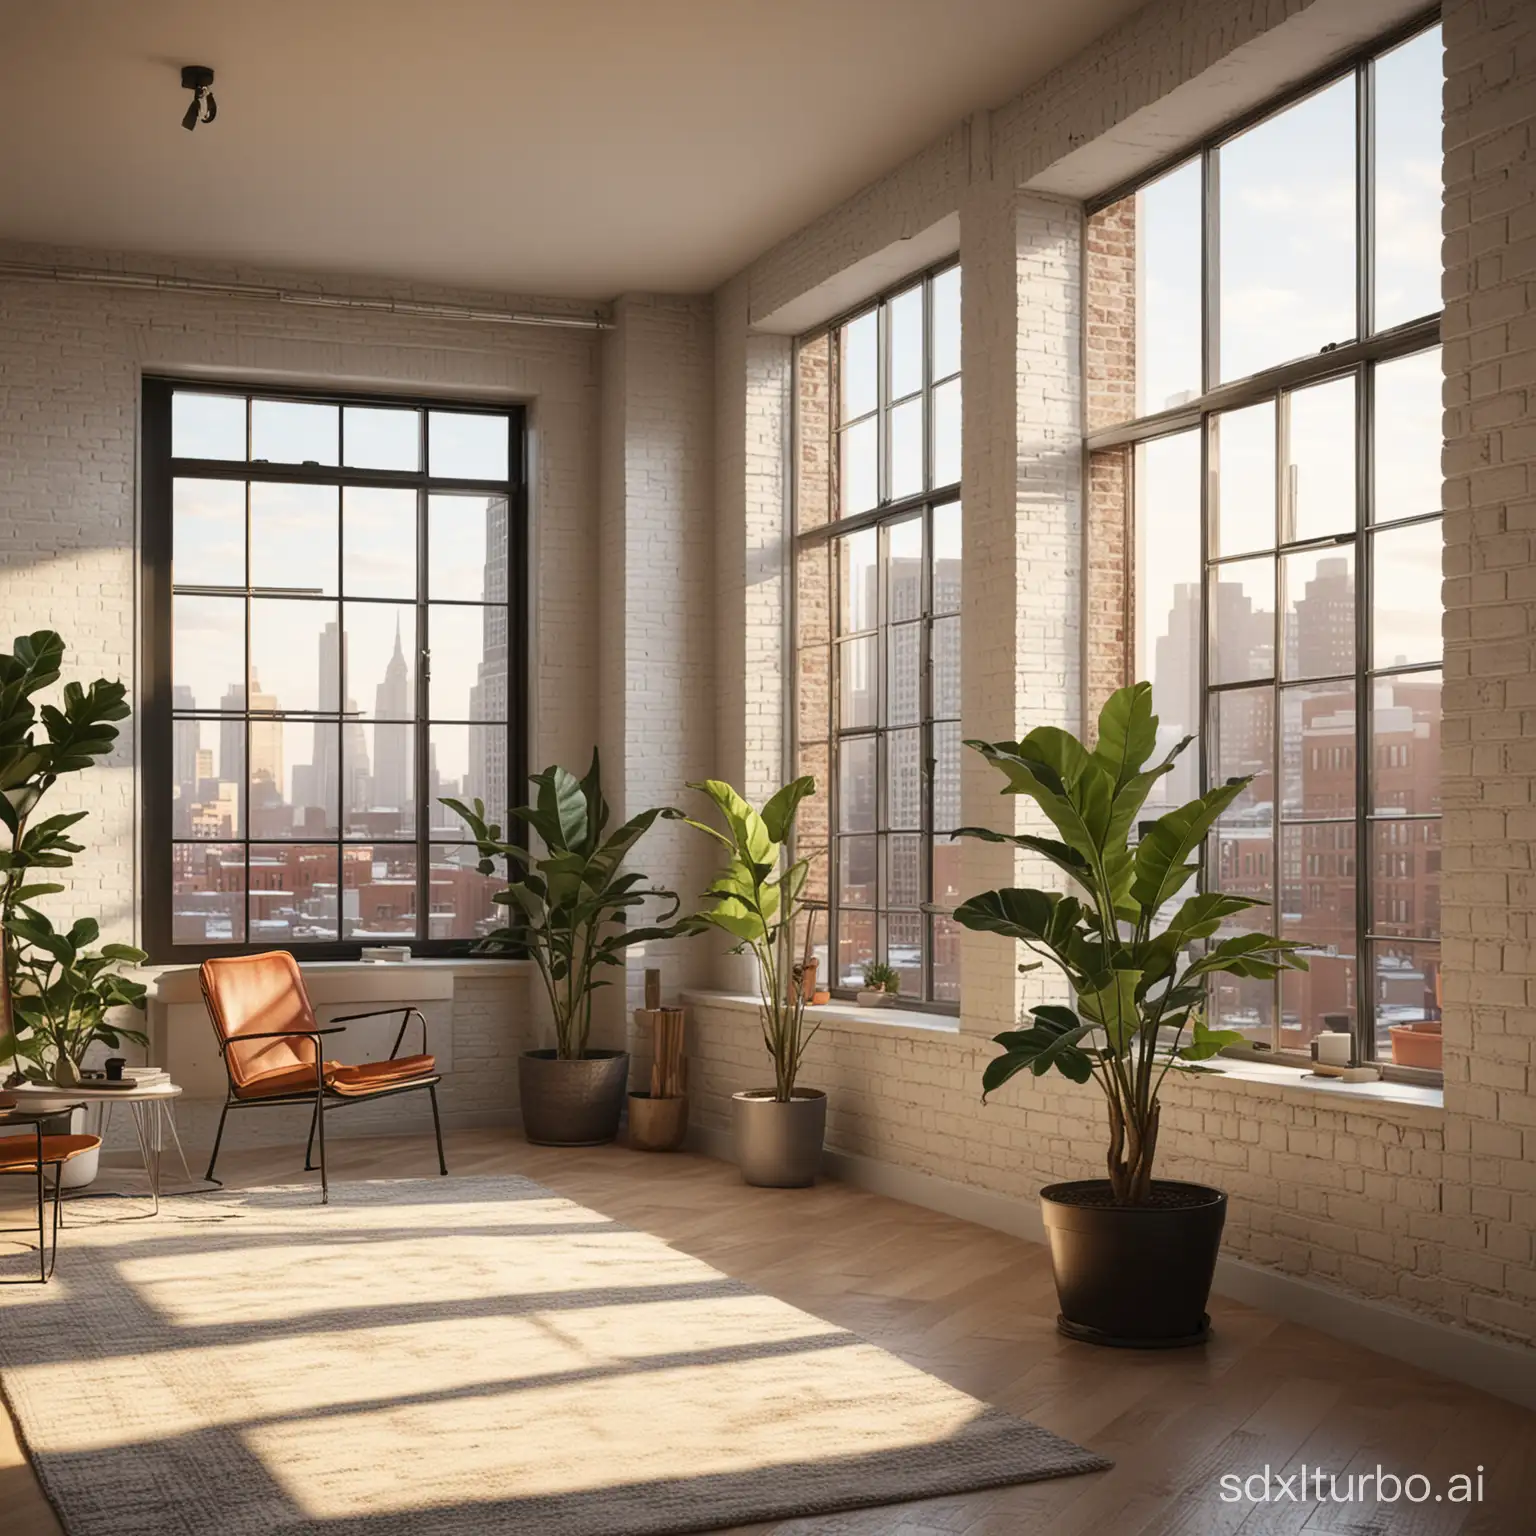 A photorealistic image of a spacious loft interior. The walls are exposed white brick with a slightly textured finish, some imperfections and subtle variations in color. Large windows with thin, black metal frames take up most of one wall, revealing a sprawling city landscape bathed in the warm glow of the setting sun. Skyscrapers pierce the twilight sky, their windows twinkling with life.  The room is sparsely furnished, with a focus on open space and natural light. In the foreground, a single large potted plant sits on a sleek, mid-century modern side table. The plant is a healthy Fiddle Leaf Fig with large, glossy leaves reaching towards the light filtering through the windows.